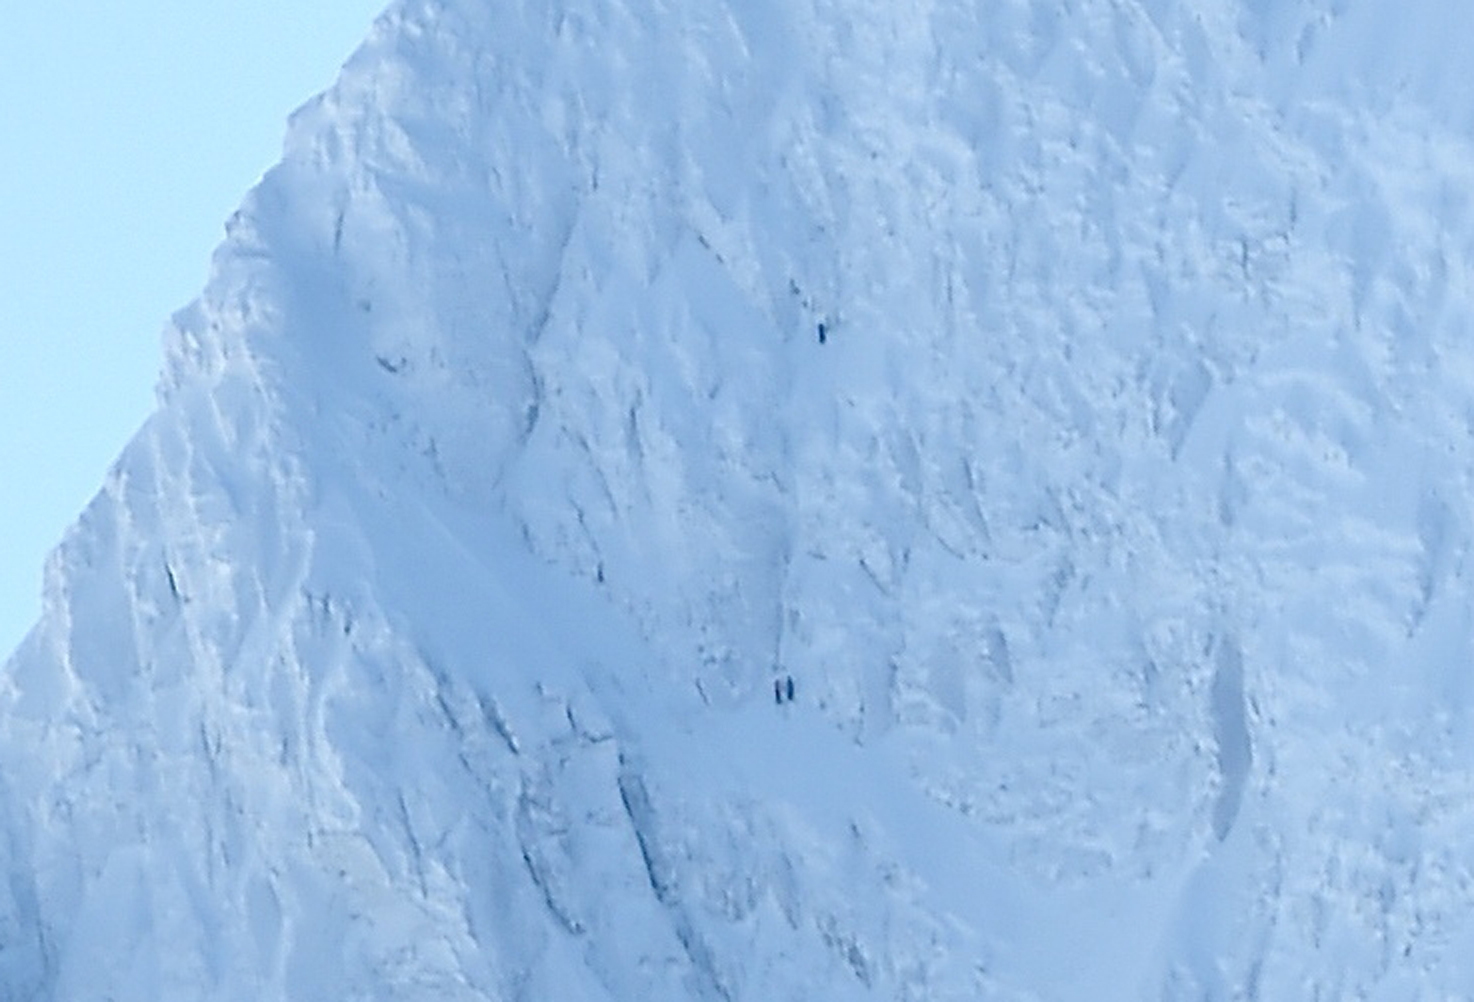 A close up view of the climbers on Ben Nevis